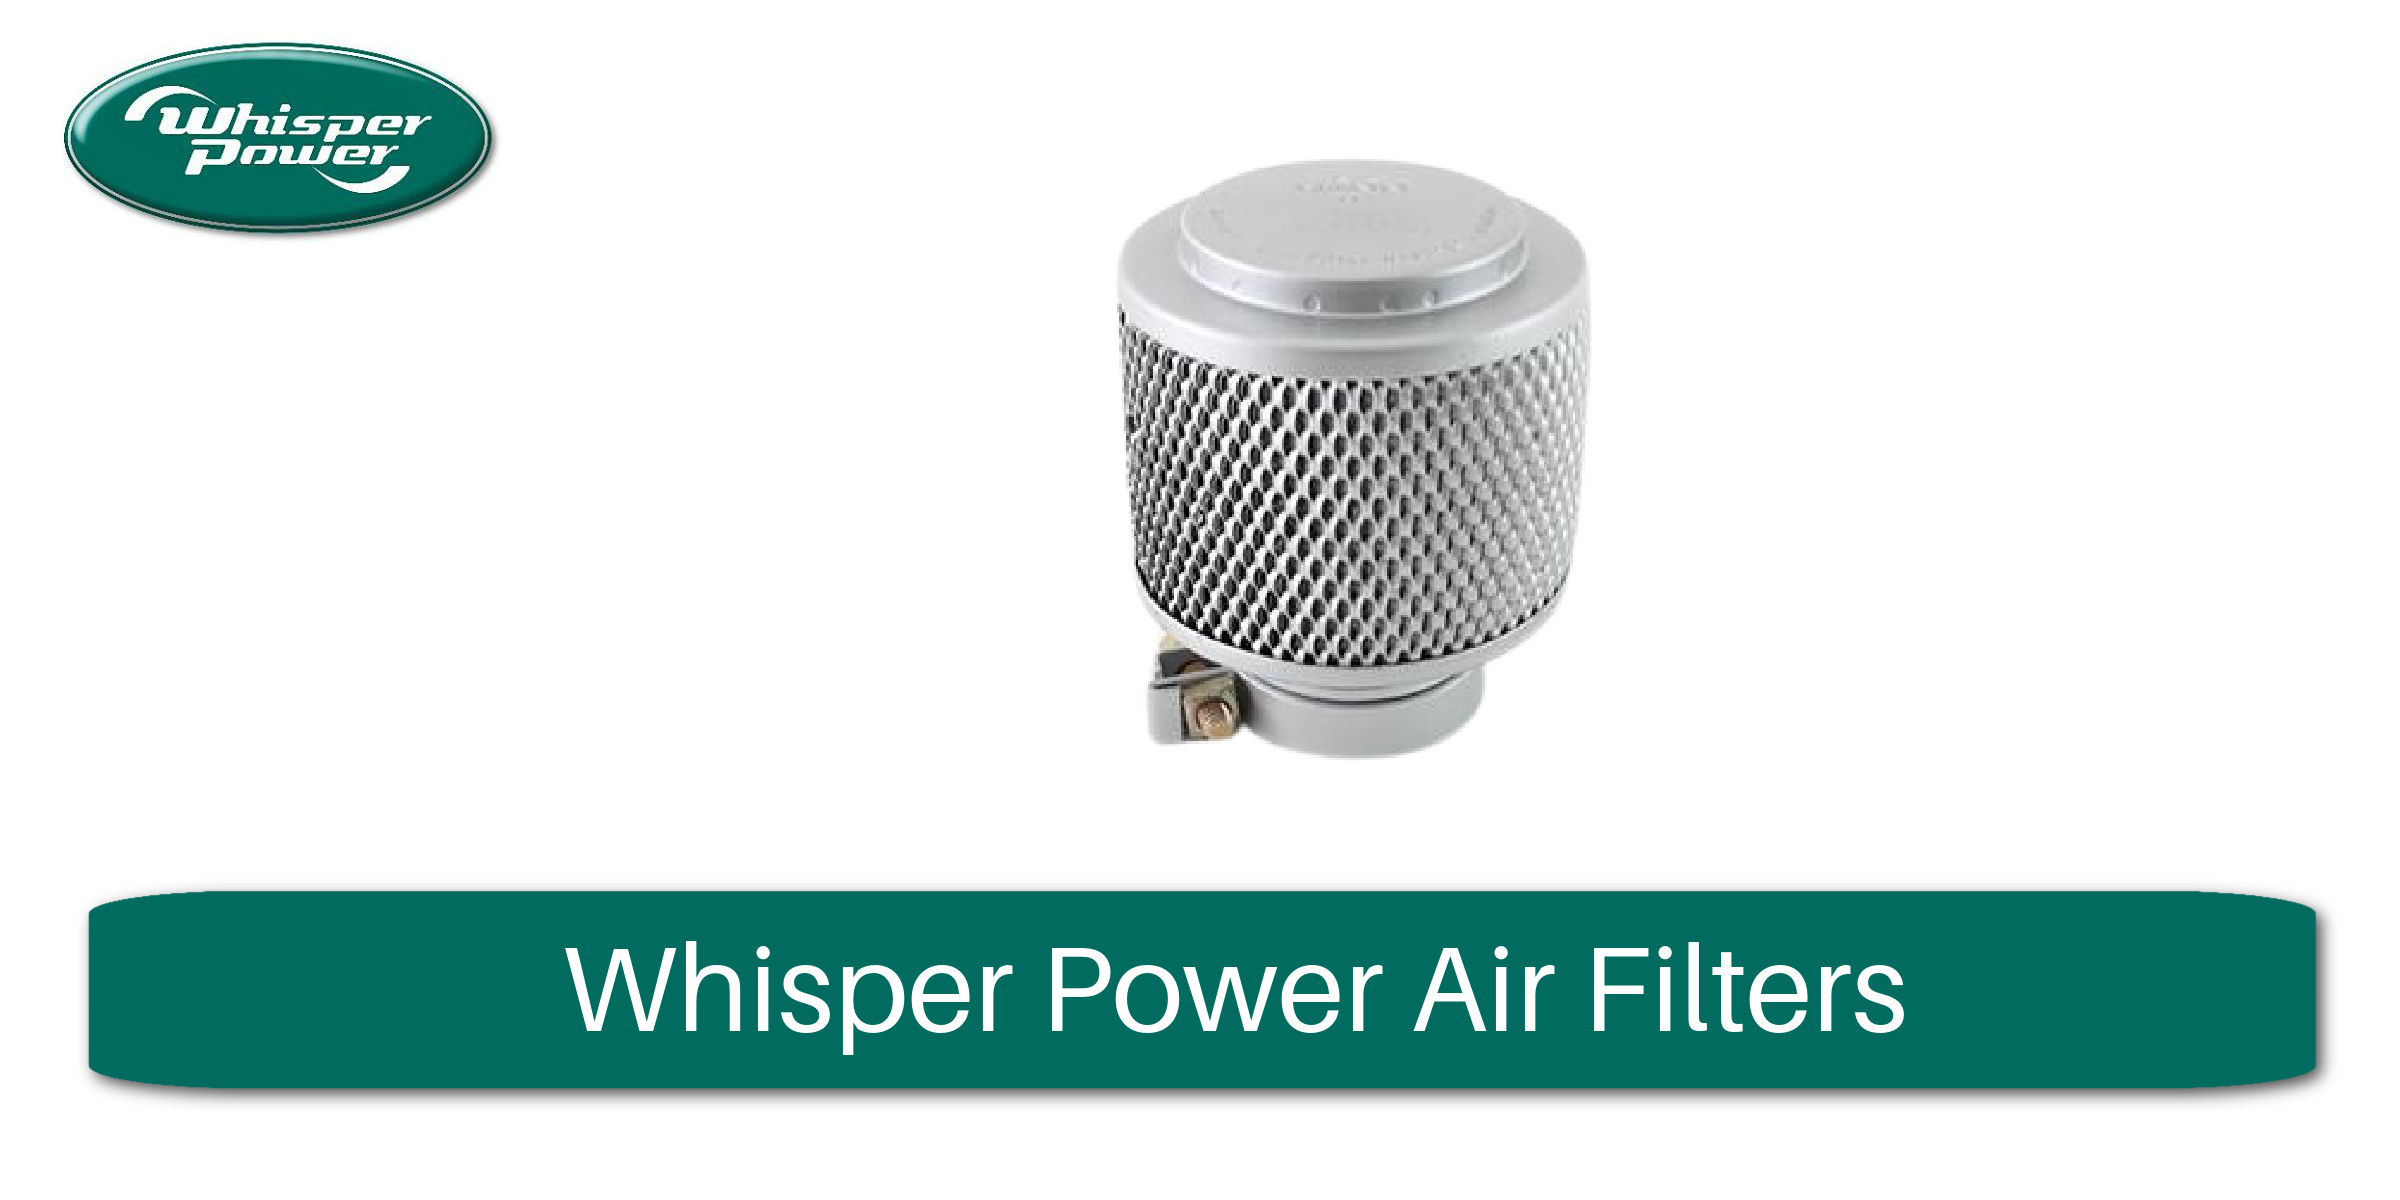 Whisper Power Air Filters